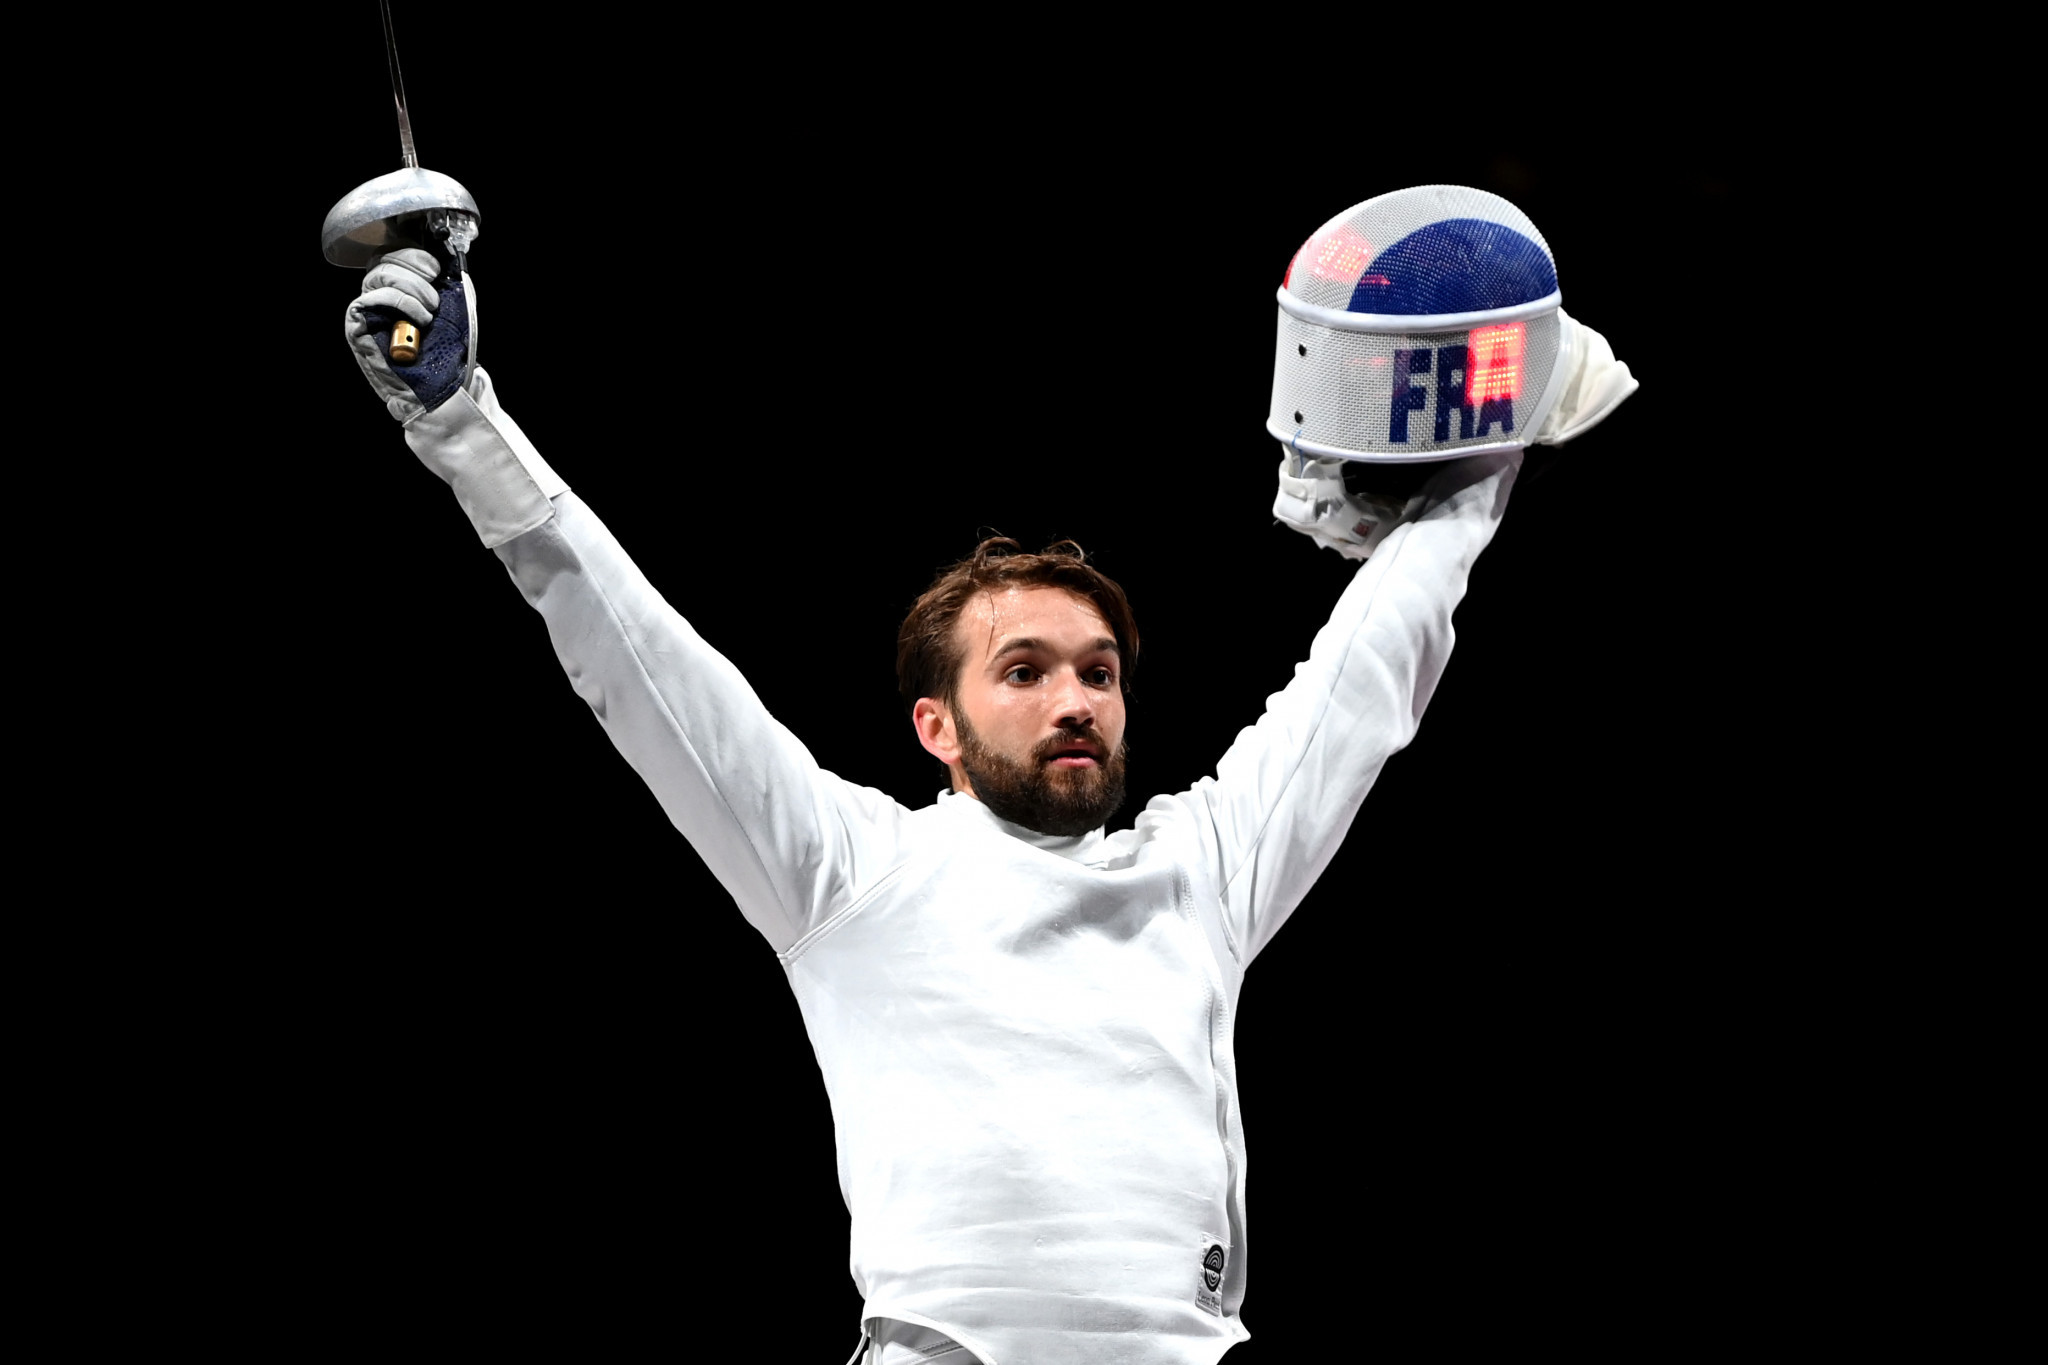 European Fencing Championships set to return in Antalya without Russia